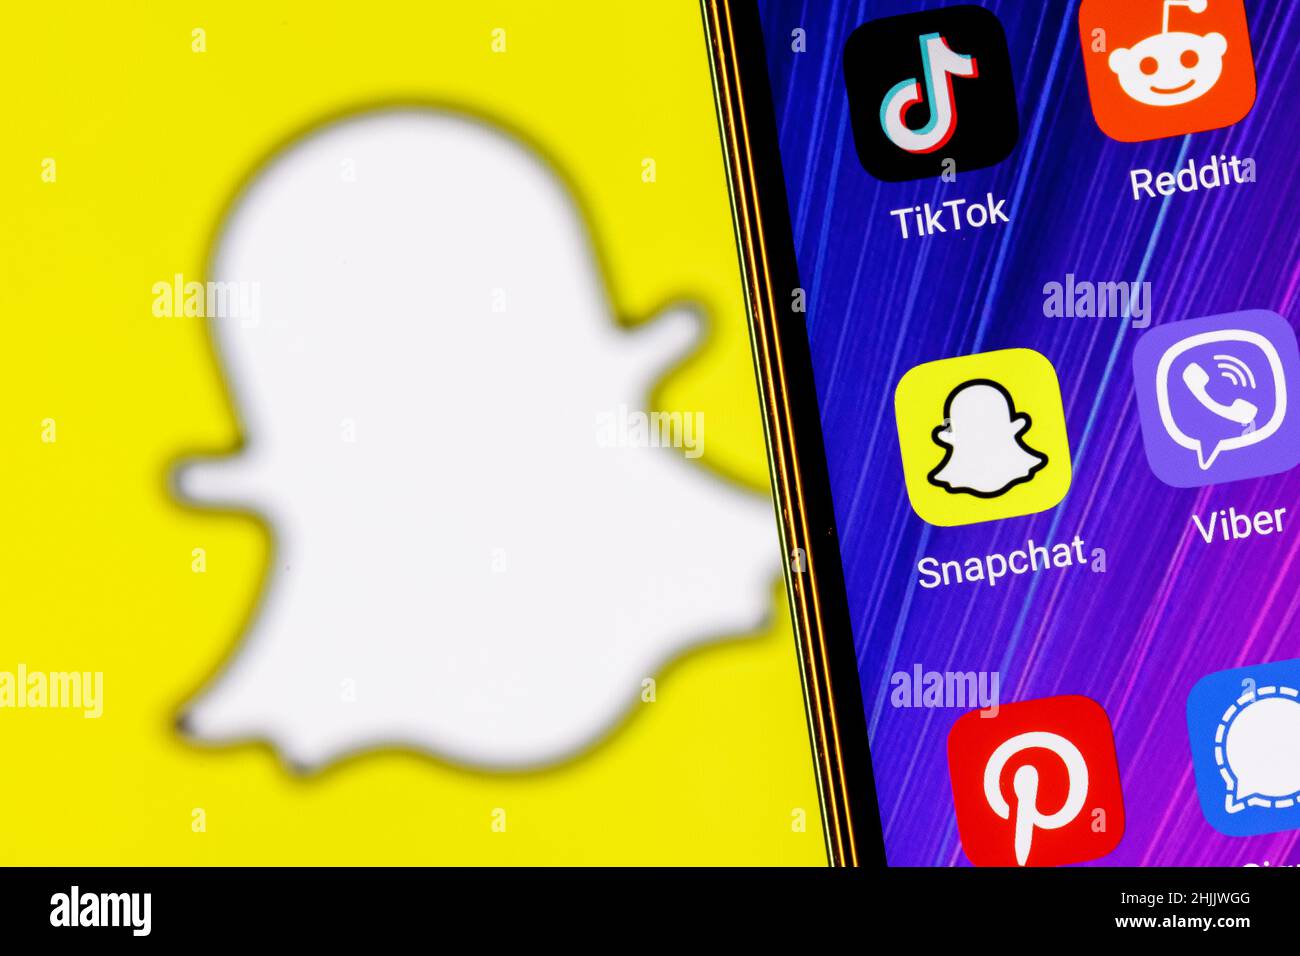 The icon of the Snapchat instant messaging service application among other applications on the smartphone screen. Stock Photo